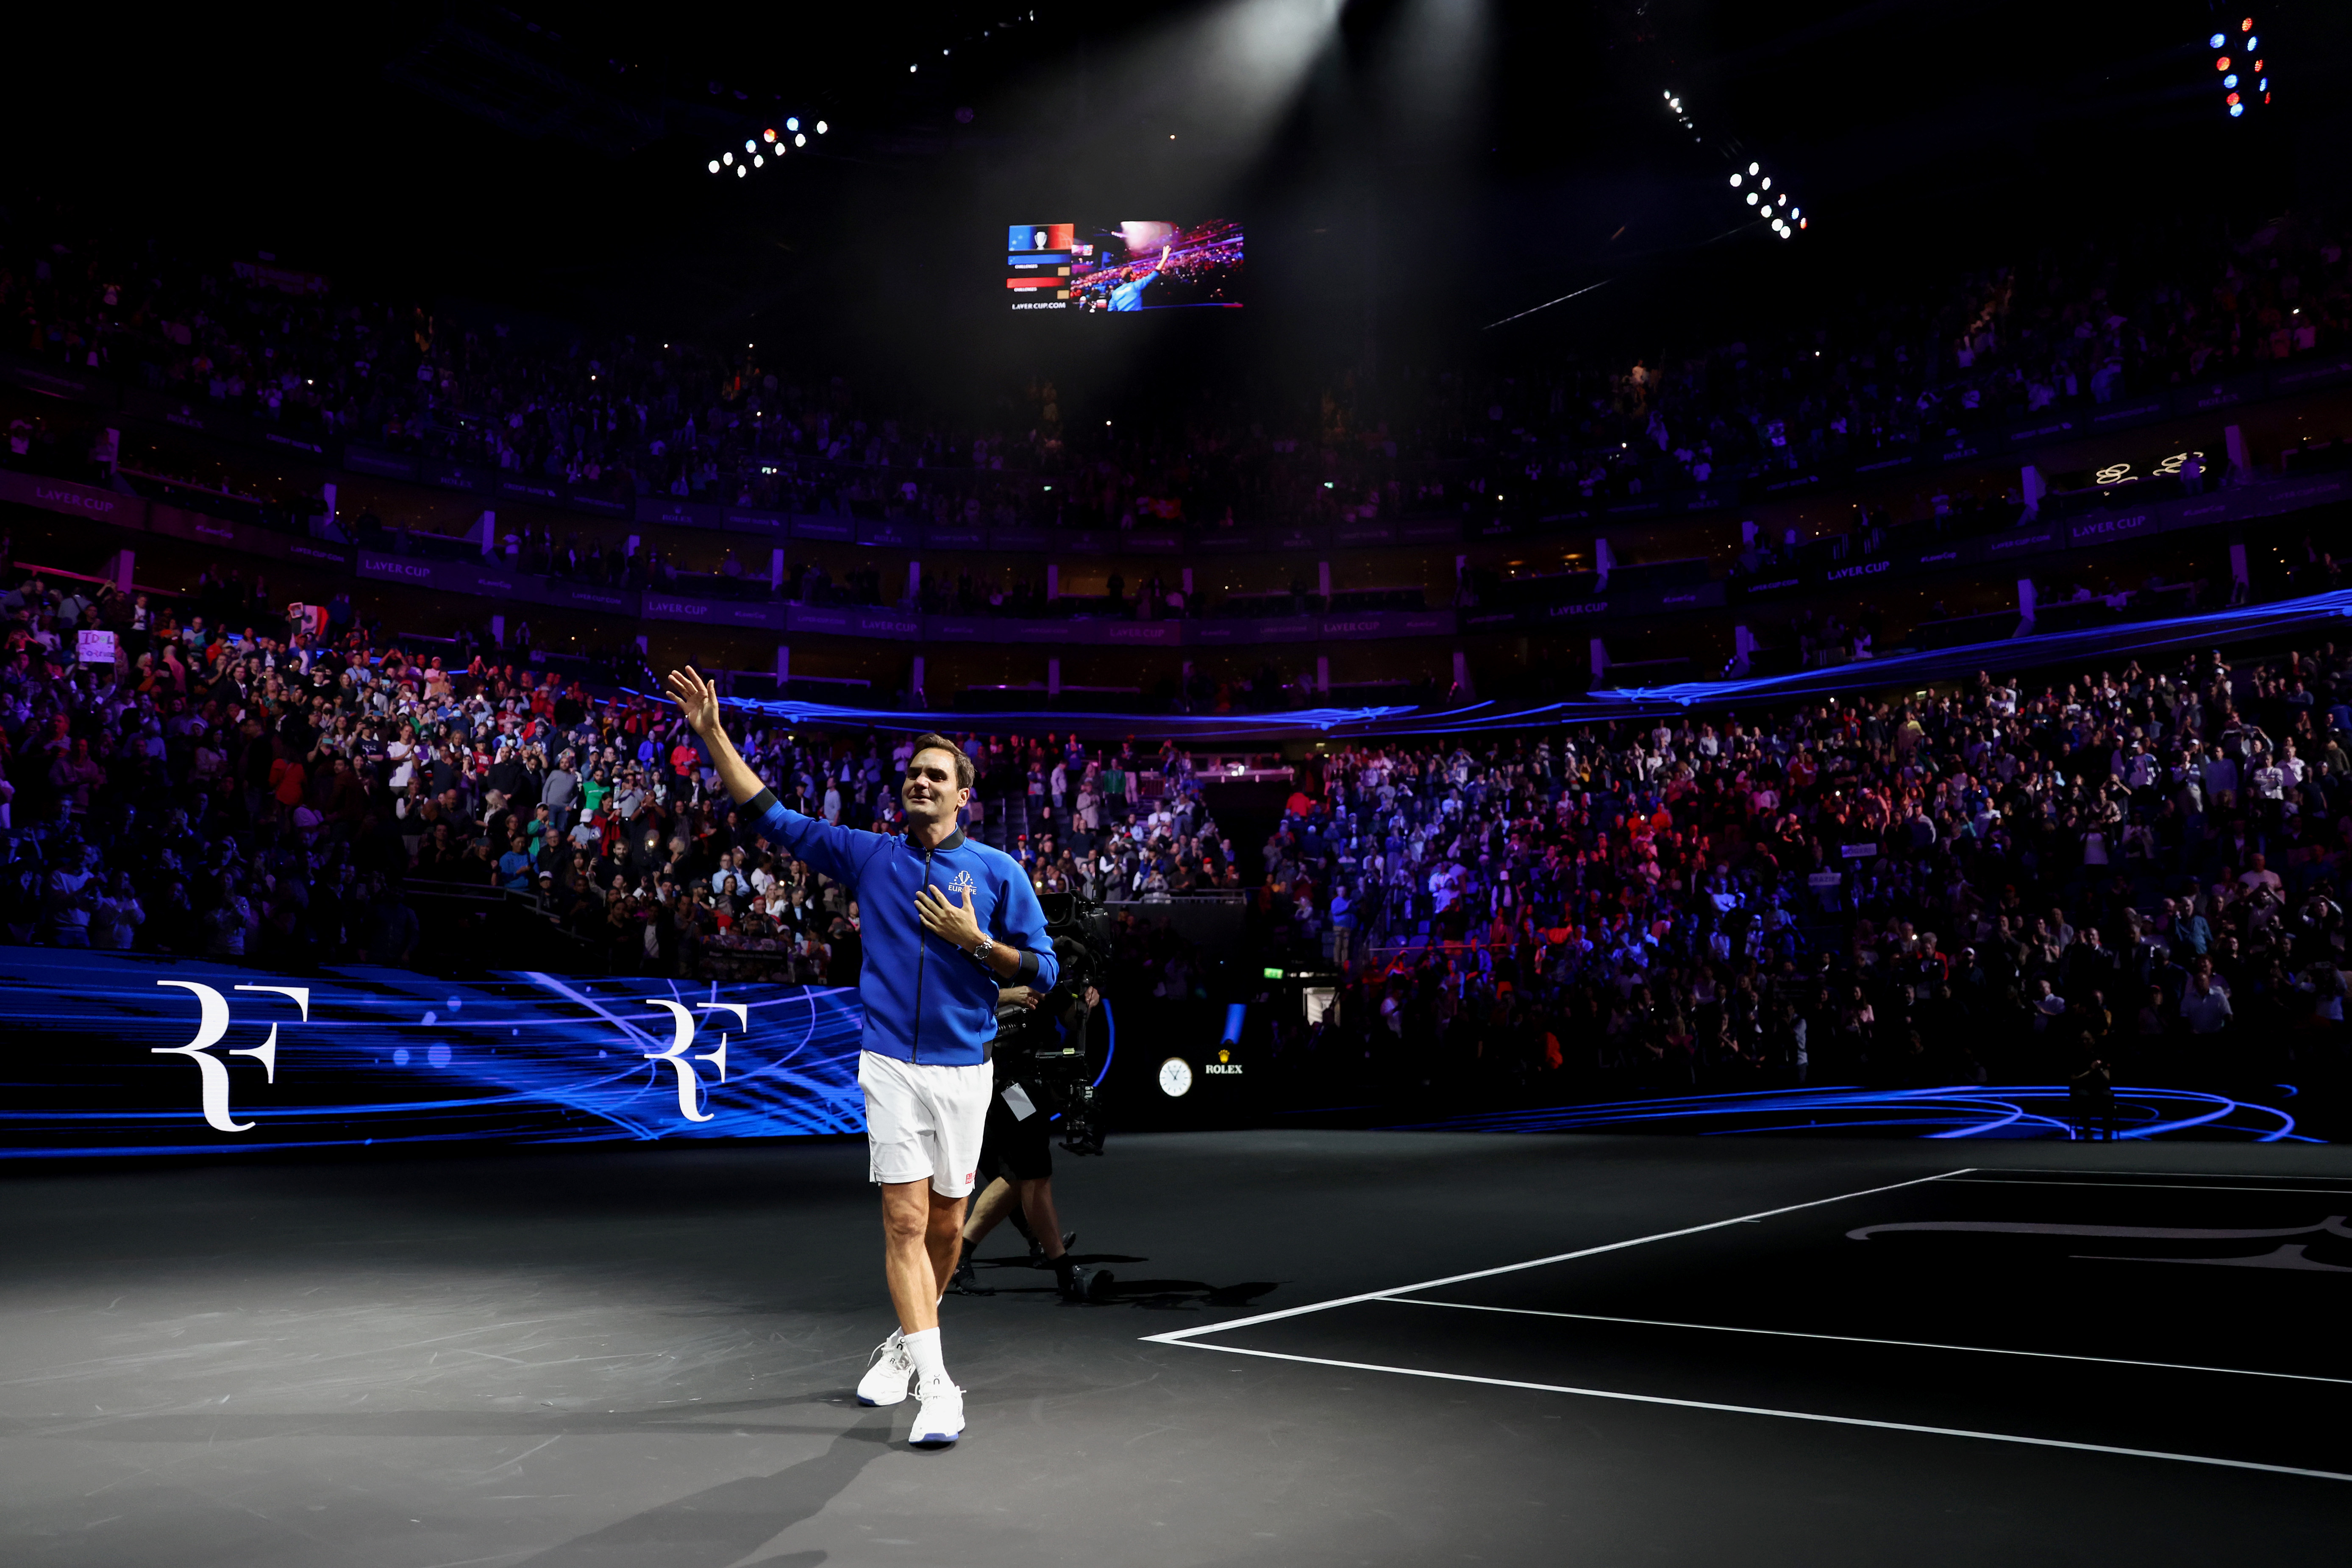 Roger Federers Laver Cup sendoff represented everything that made his career one-of-a-kind